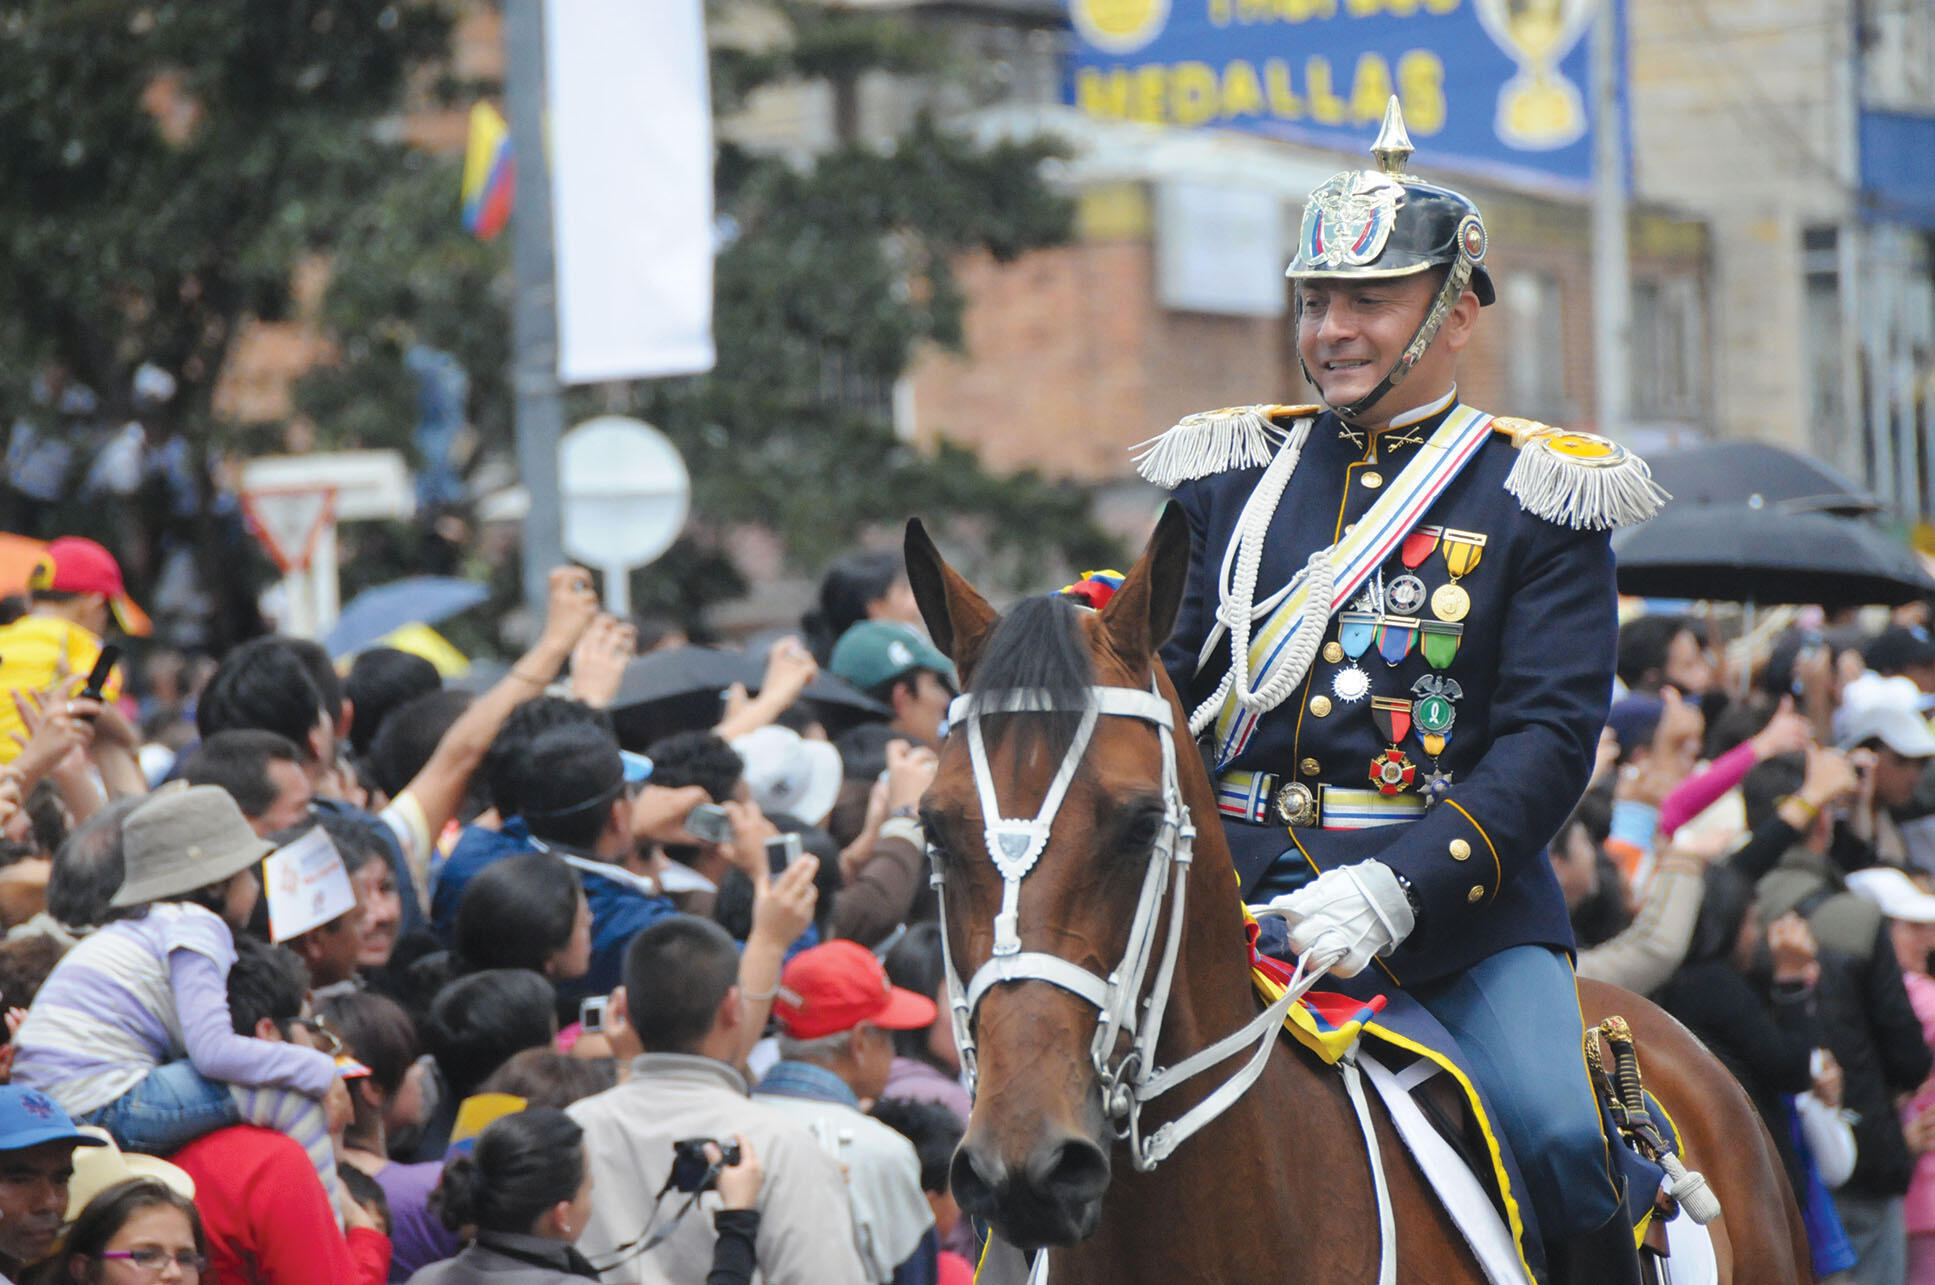 A man on horseback in an archaic uniform as the military parades in period uniforms during the Colombian bicentennial, 2010. (Photo by Ronald Dueñas.)